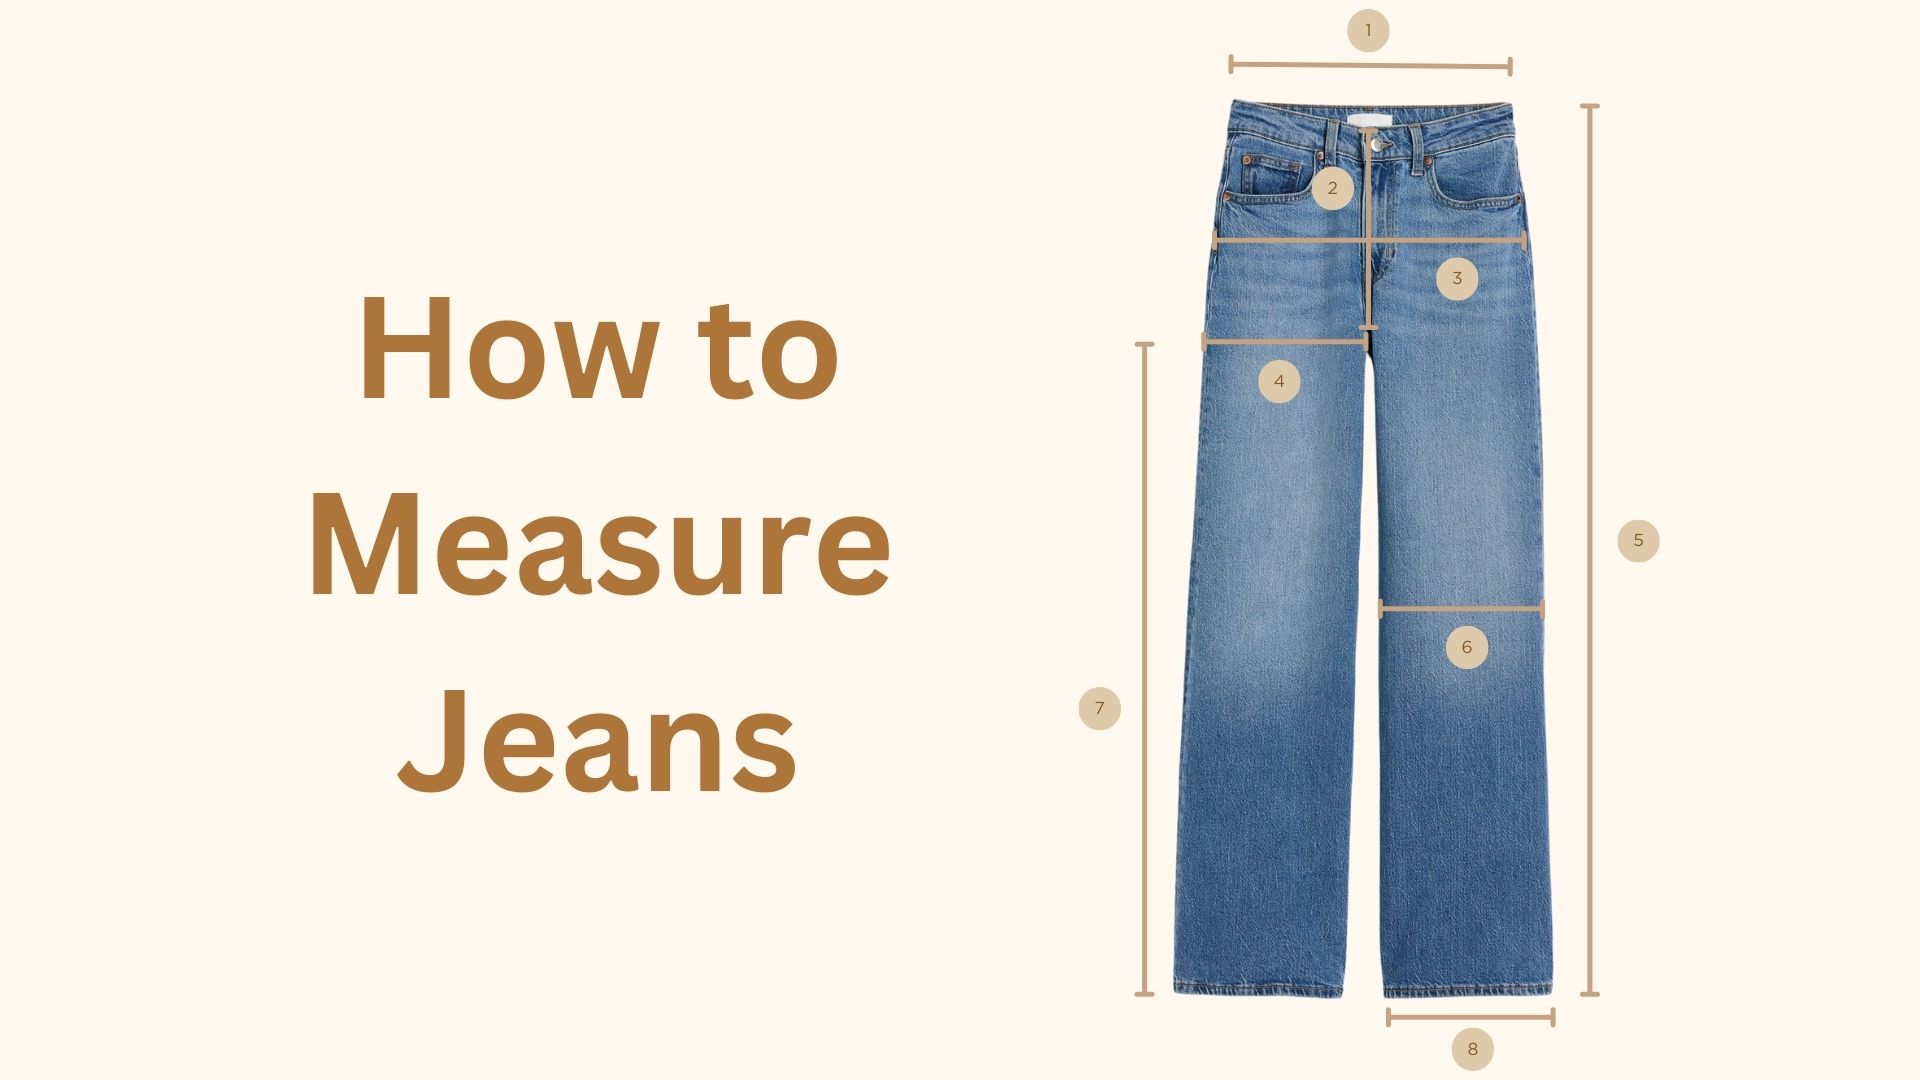 How to Wear High-Waisted Jeans - A 2022 Style Guide – Shop the Mint